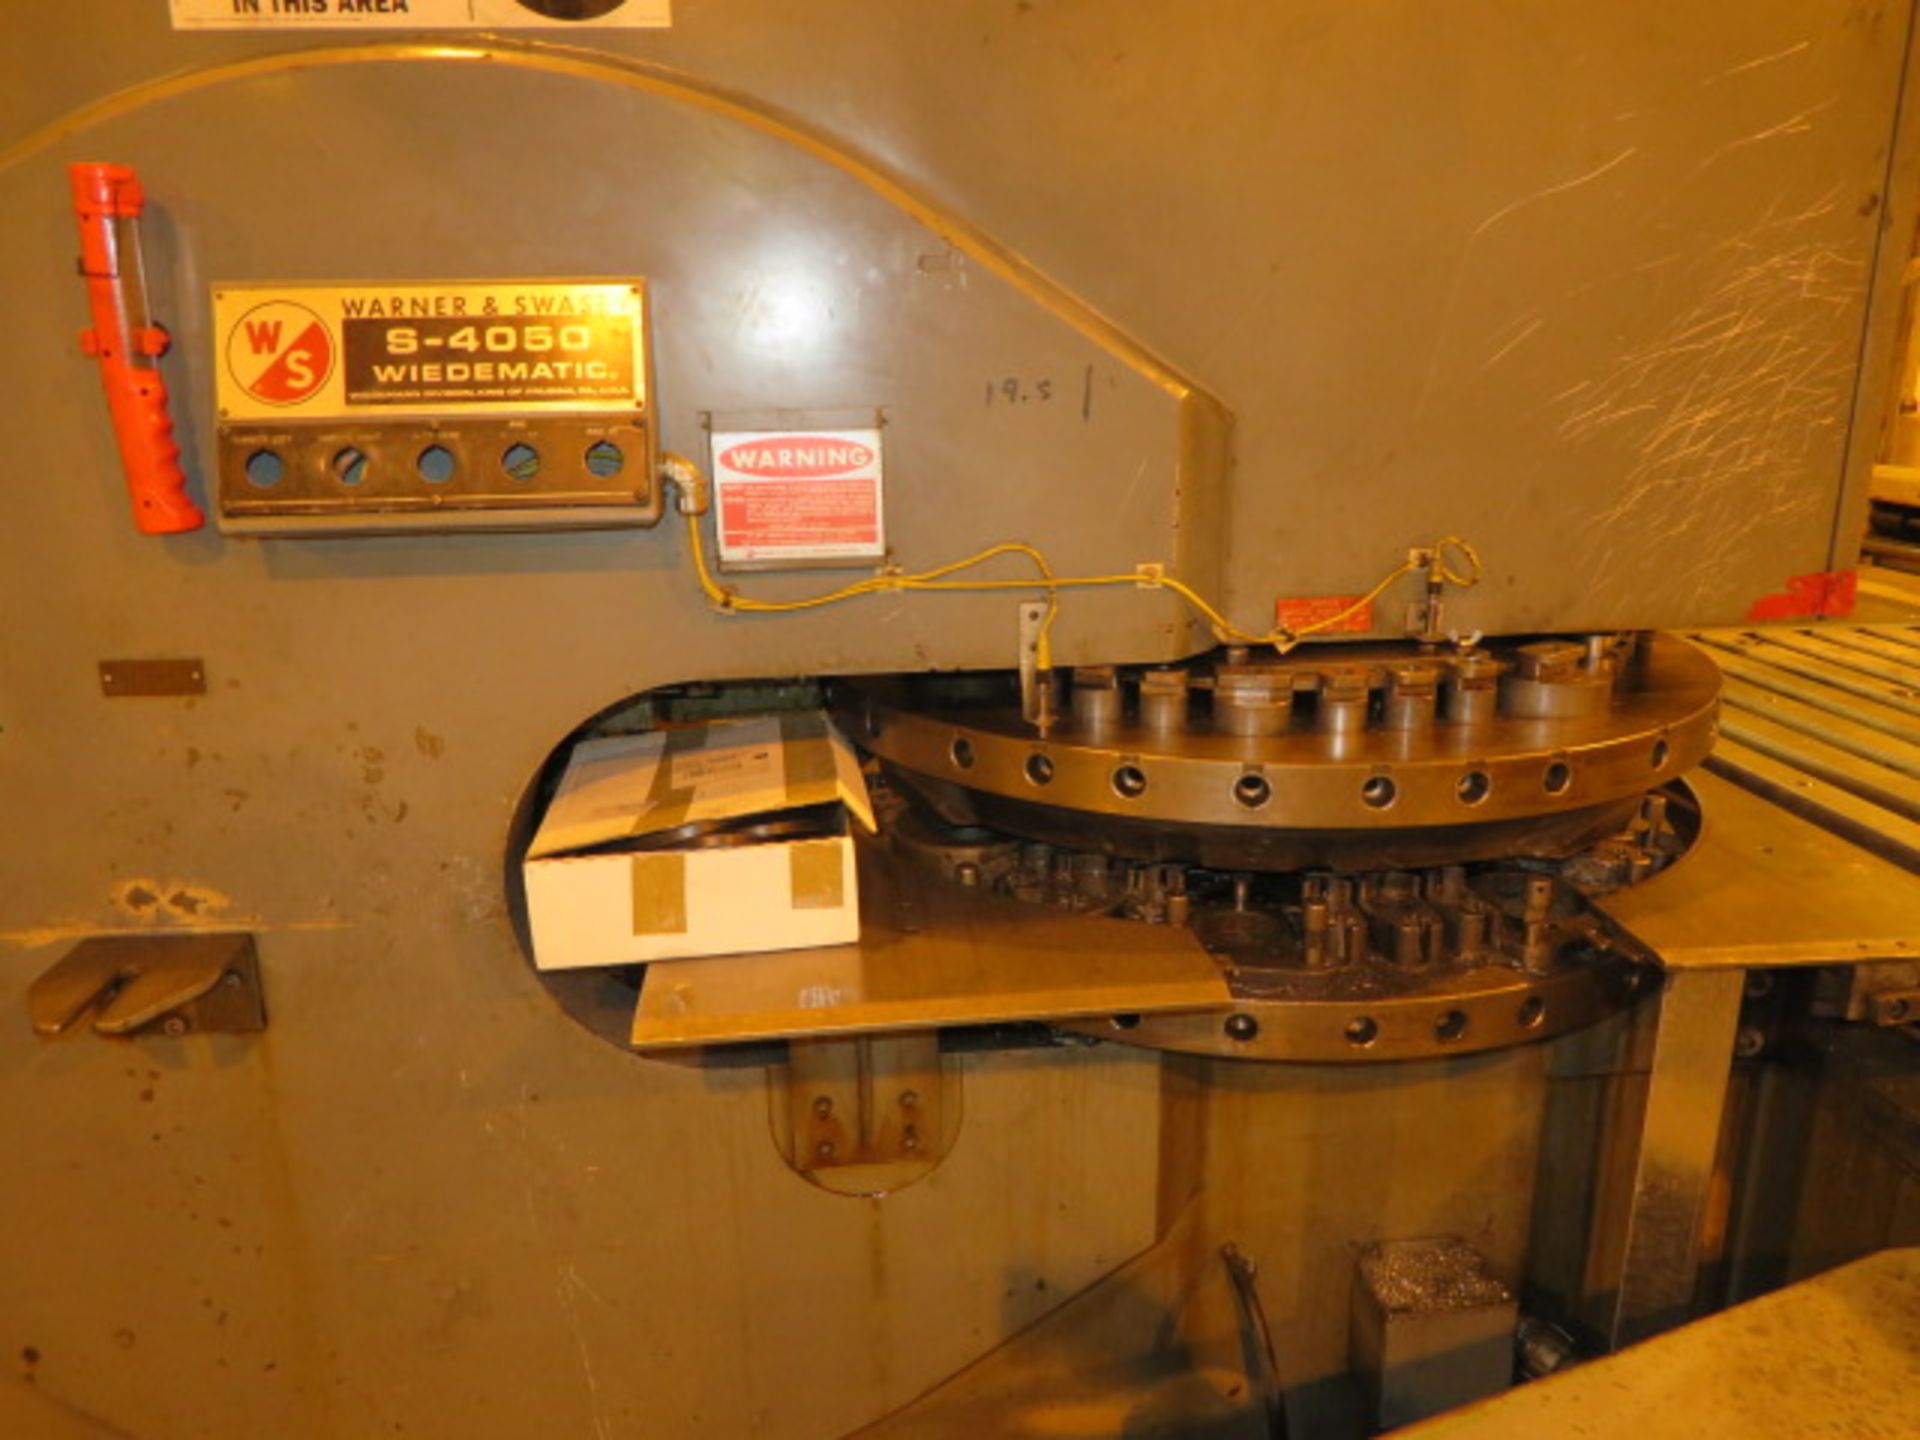 WARNER & SWASEY S4050 WIEDEMATIC CNC TURRET PUNCH, S/N 239 (RETROFITTED WITH) MILON X-CEL SLICER CNC - Image 3 of 9